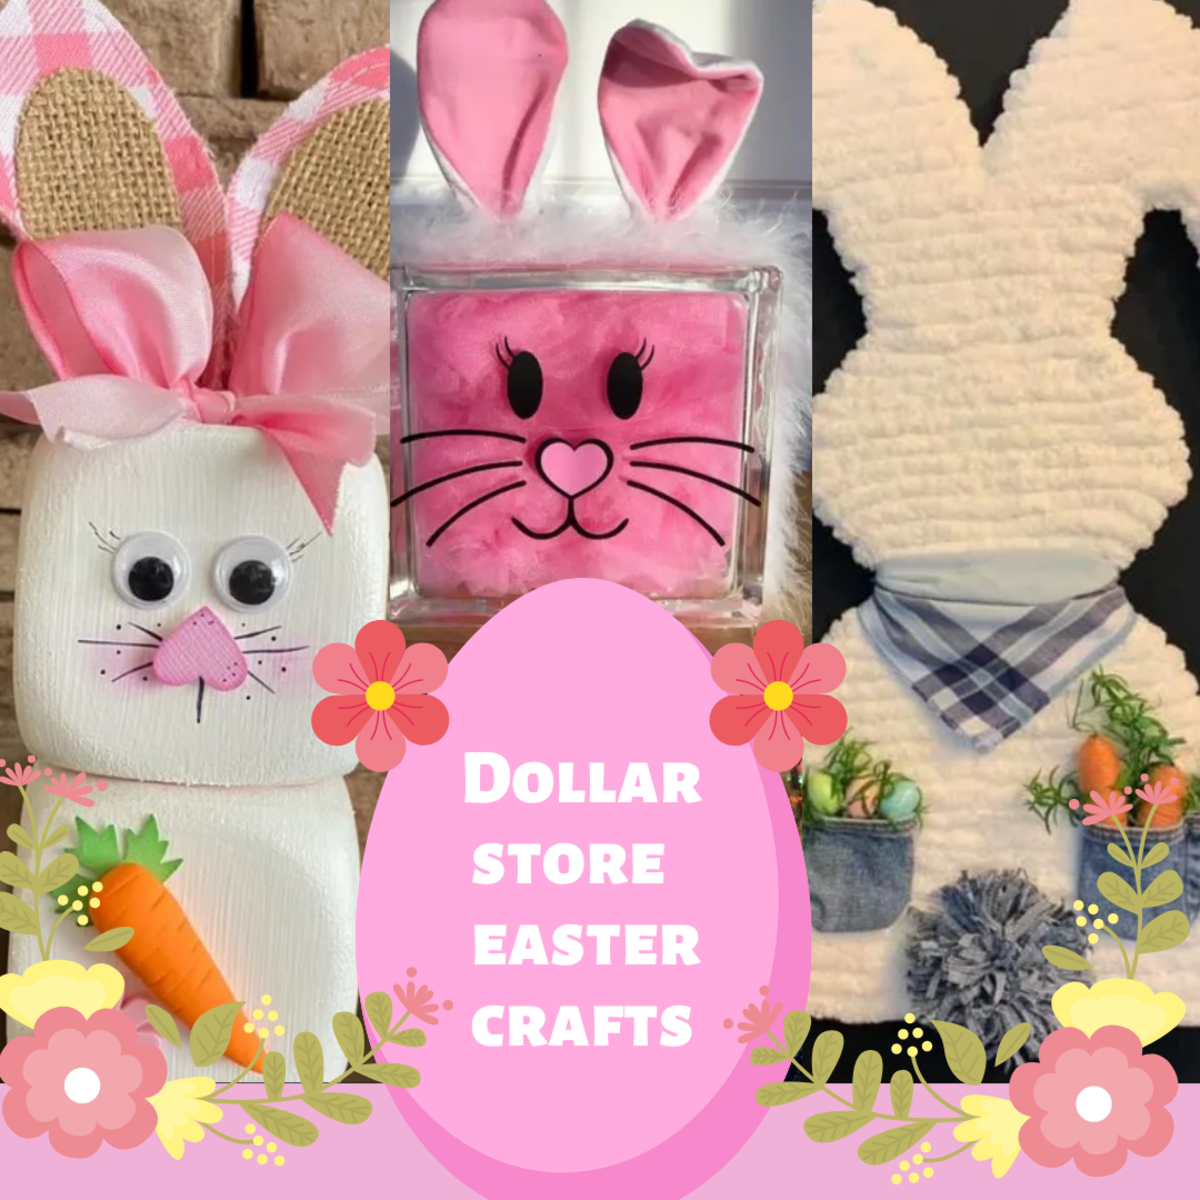 These Easter crafts are fun to make and aren't expensive!